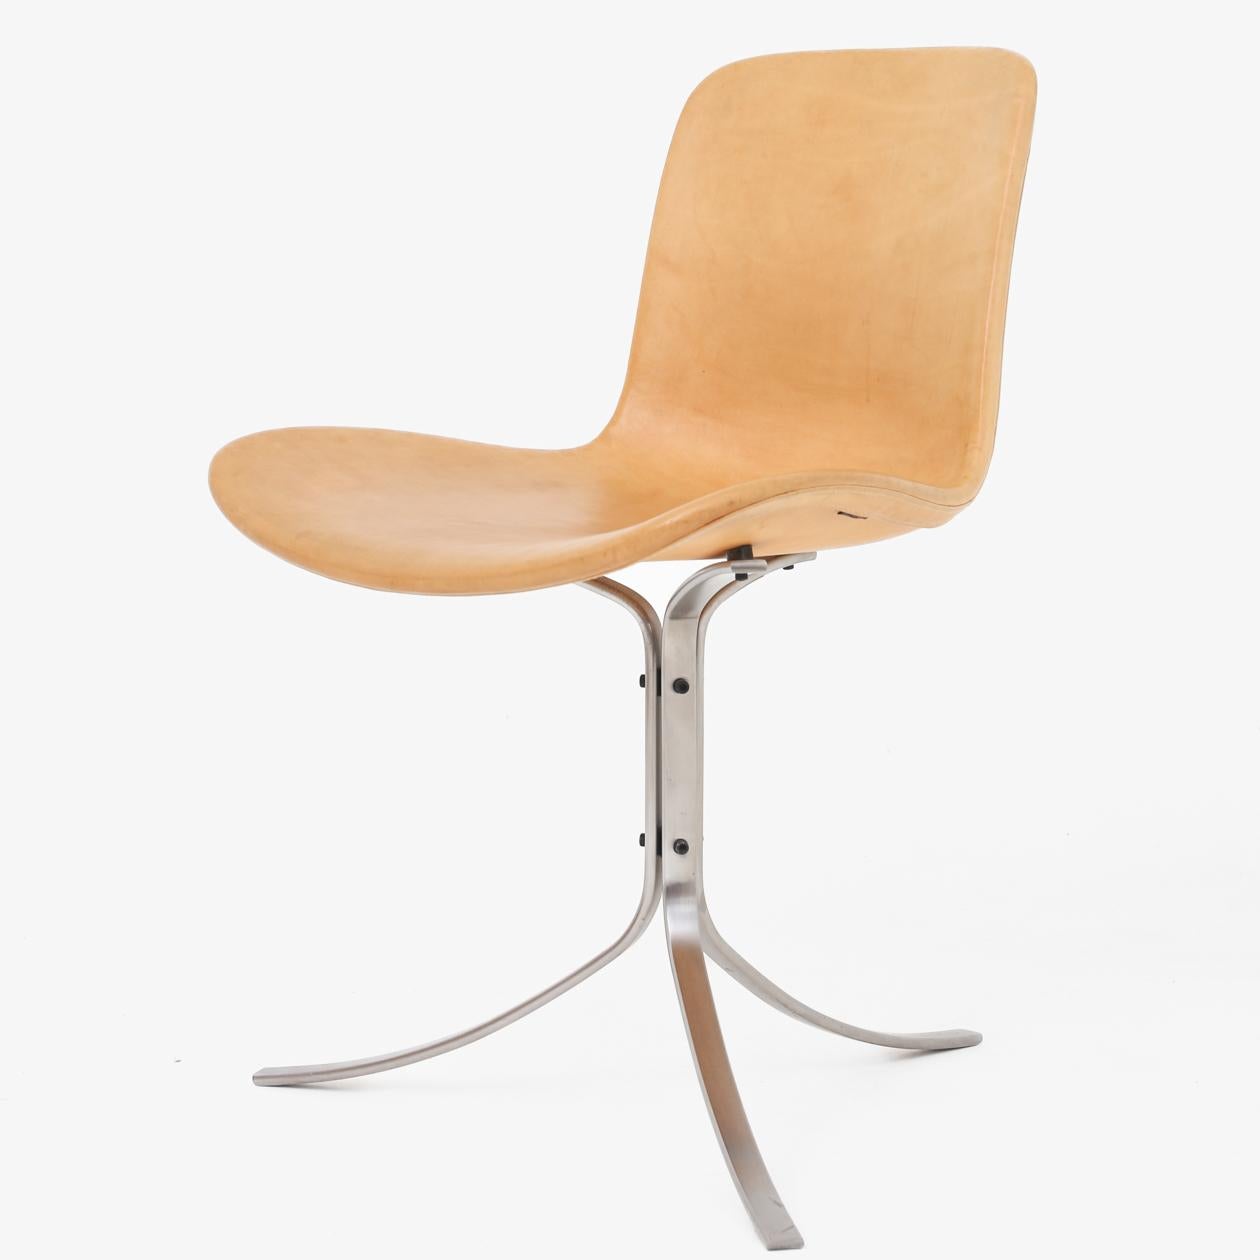 PK 9 - 'Tulip' chair in patinated natural leather on steel frame. Poul Kjærholm / Fritz Hansen